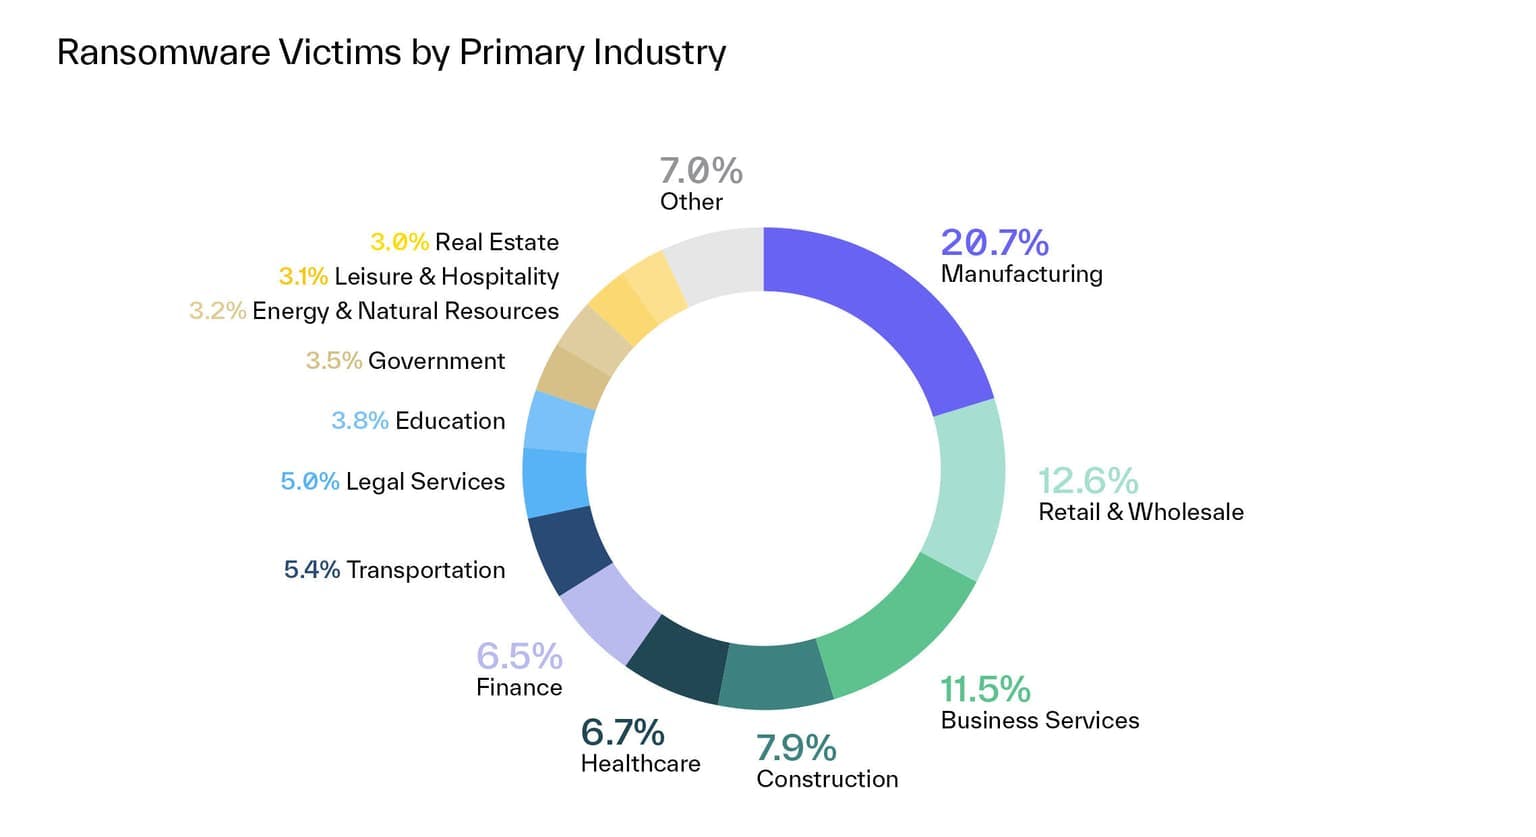 Ransomware victims by primary industry